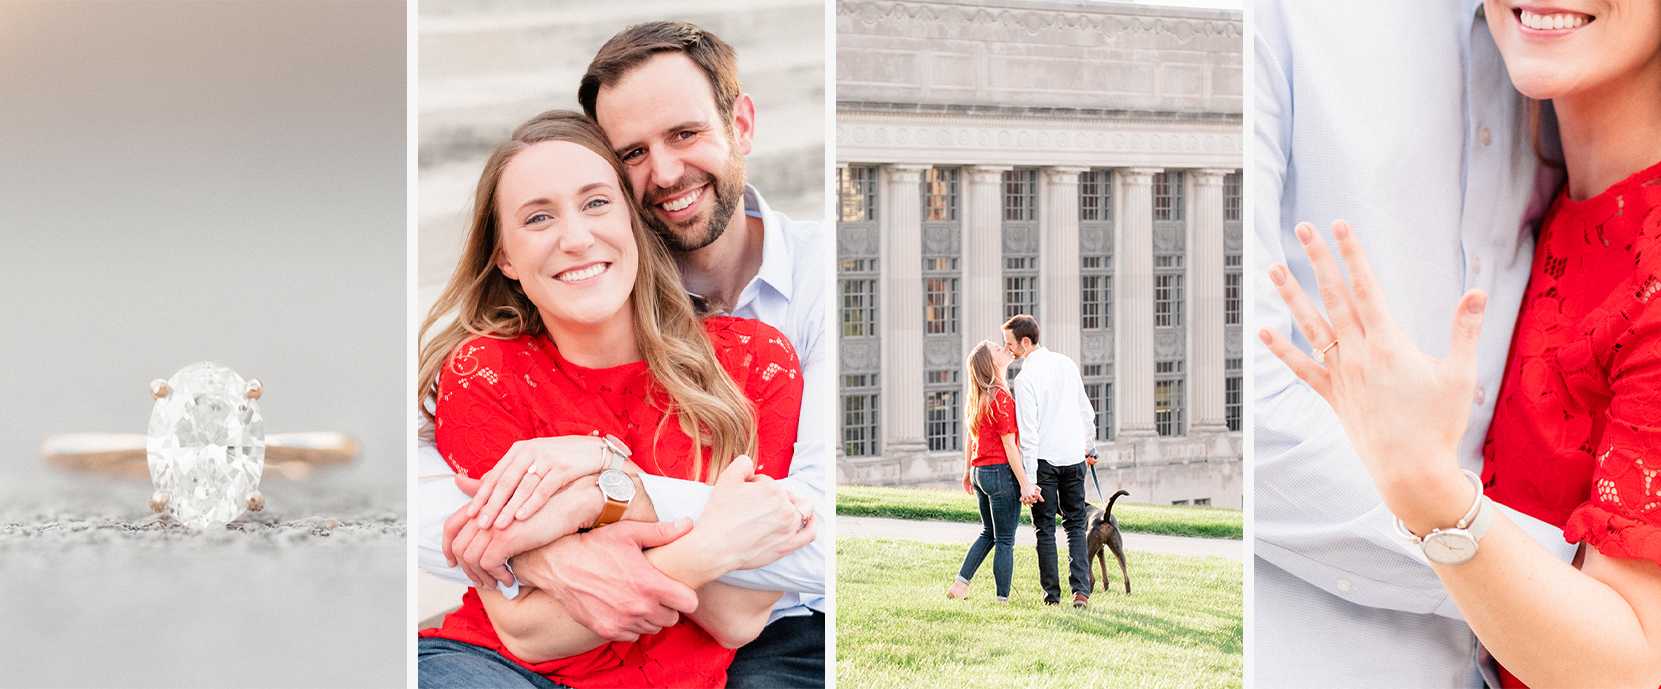 couple's springtime evening surprise proposal at Union Station in Kansas City, MO